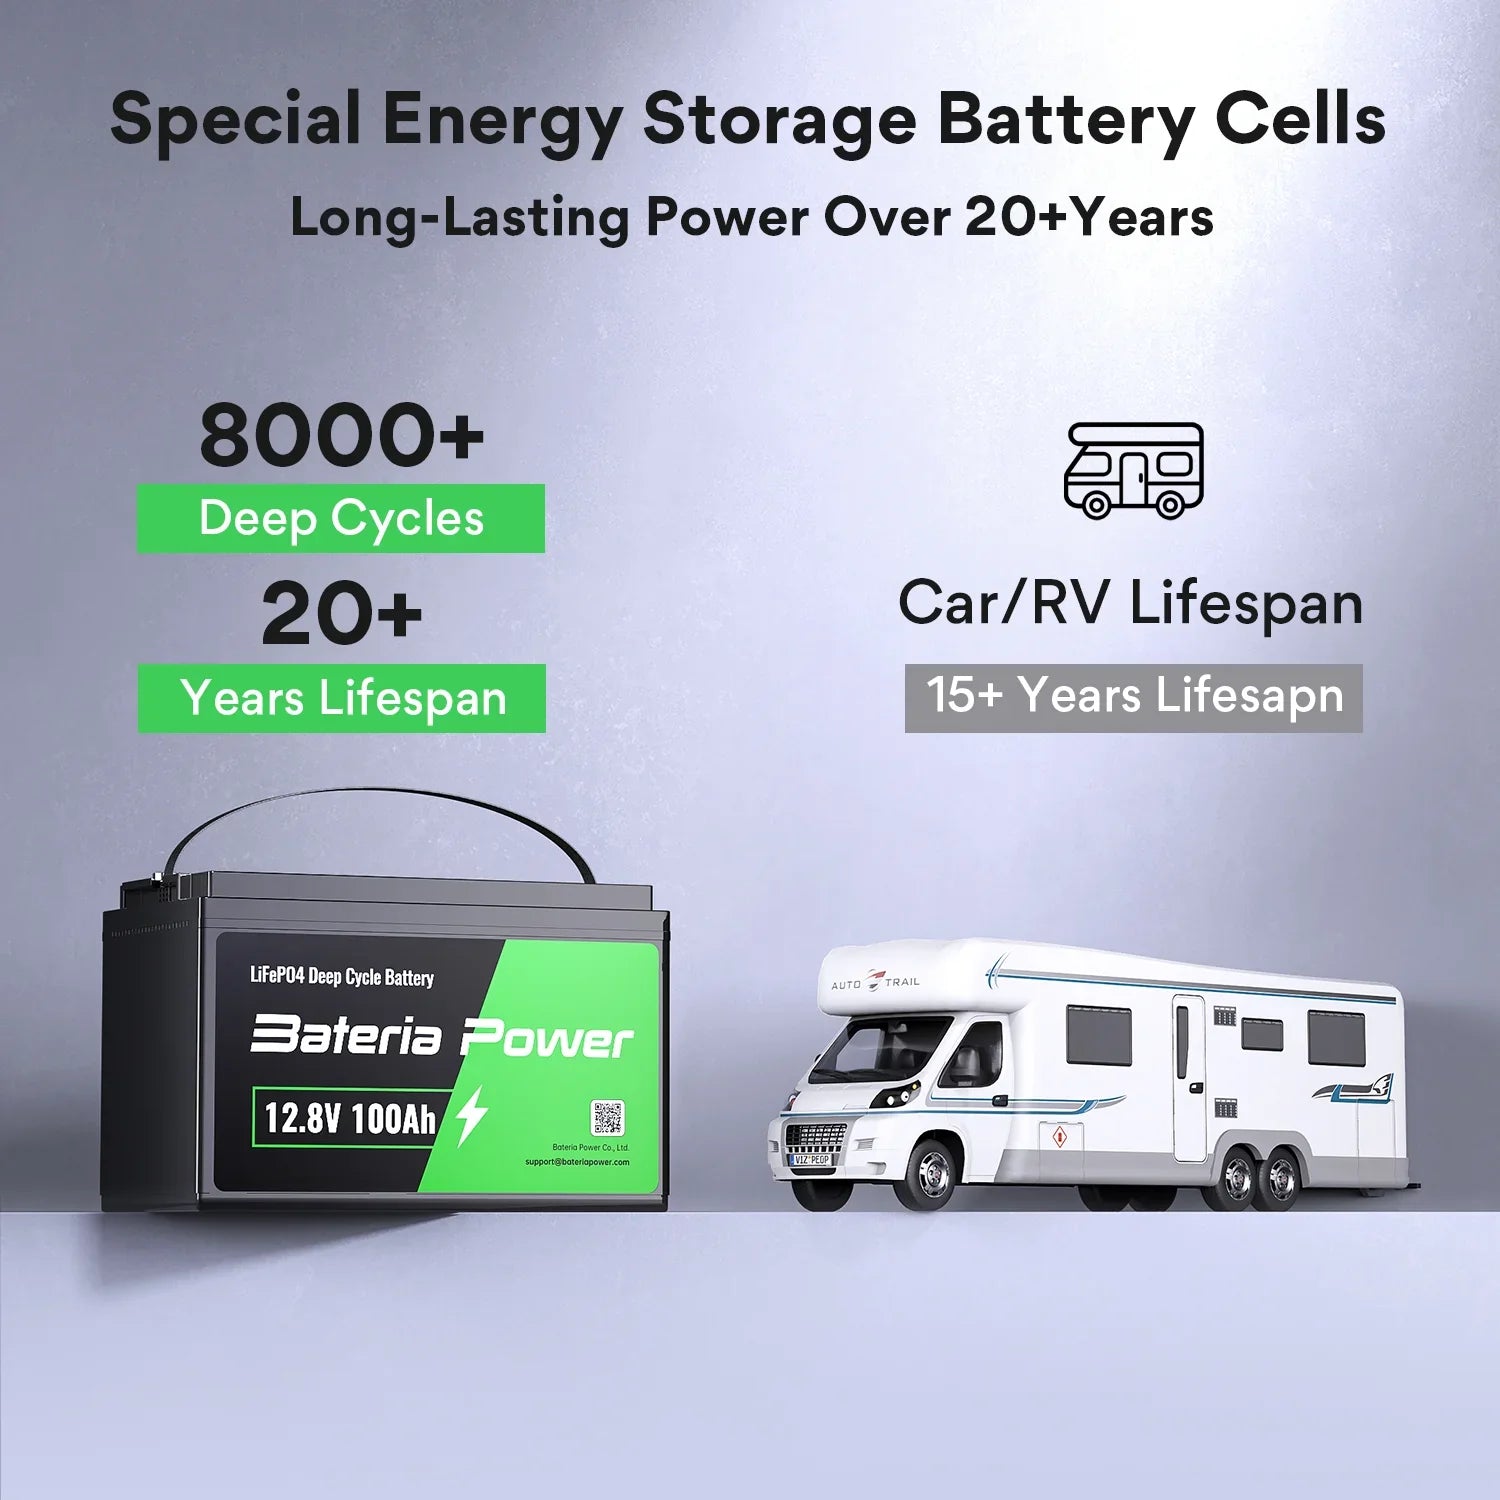  LiFePO4 batteries is 8 to 10 times than the standard lead-acid batteries